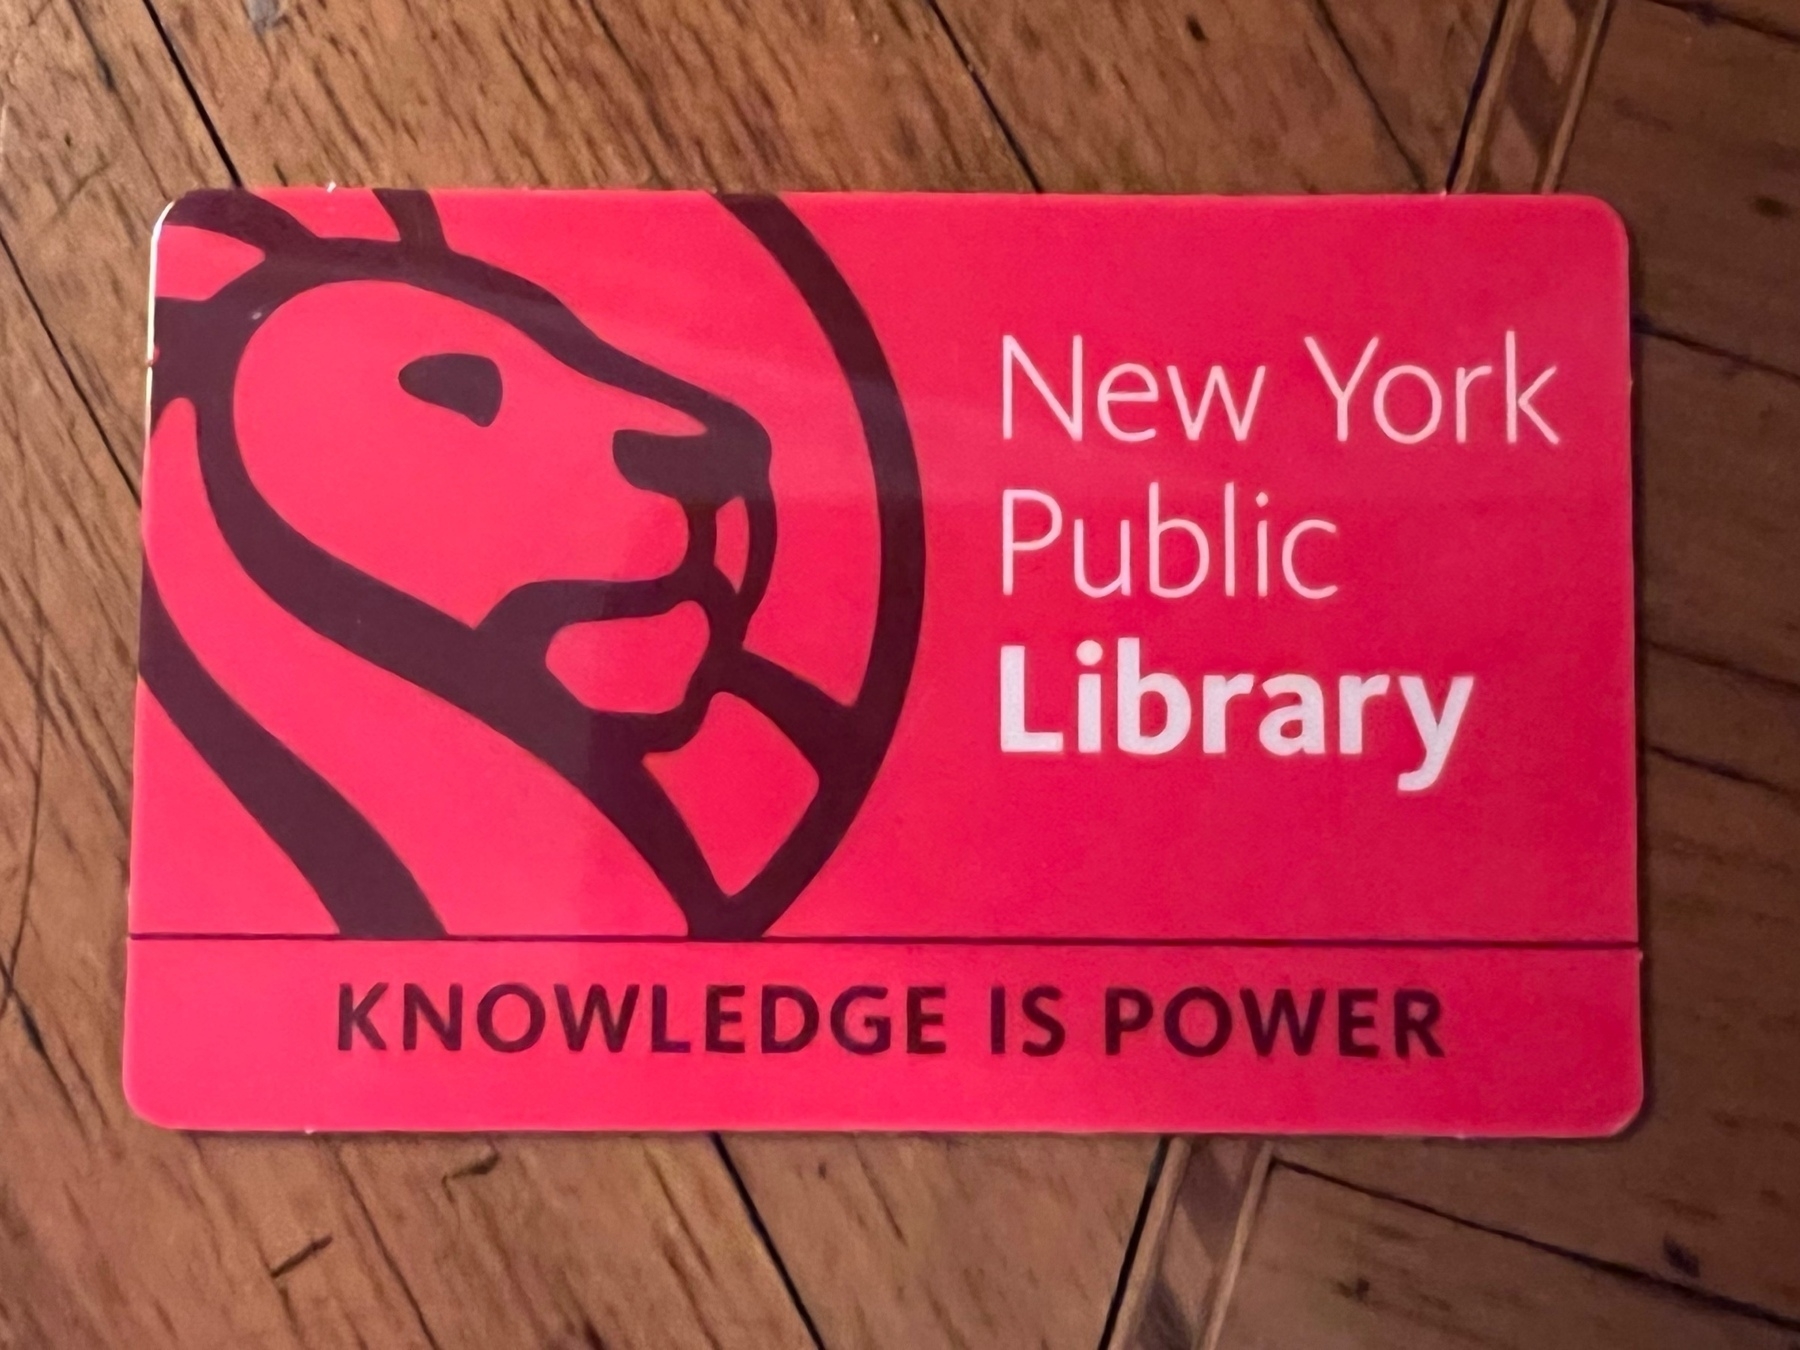 Red card with lion illustration and words: “New York Public Library” and “Knowledge is Power.”